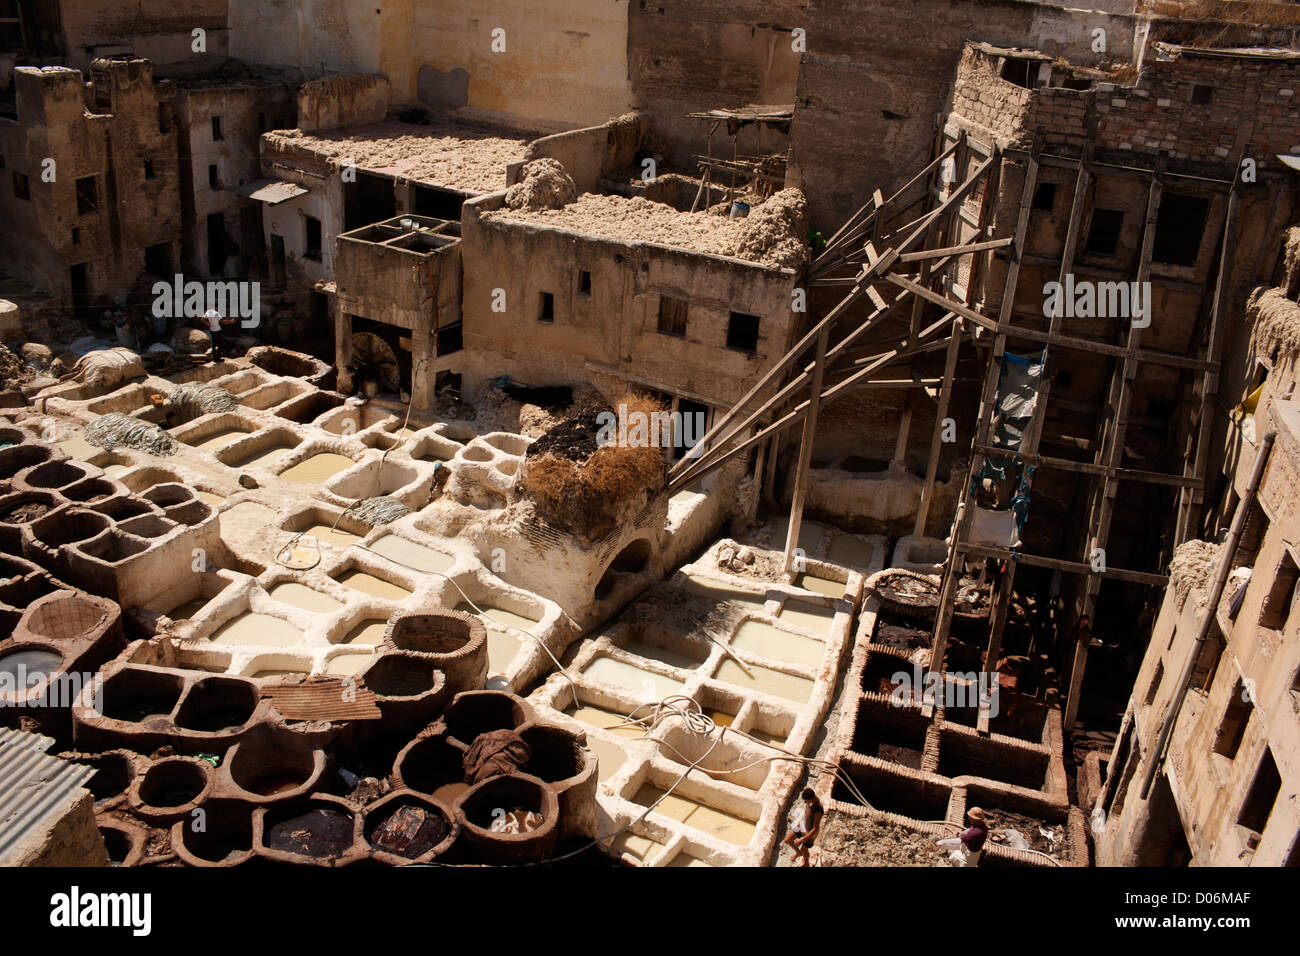 Vats of Dye at Tannery Fez Morocco Stock Photo